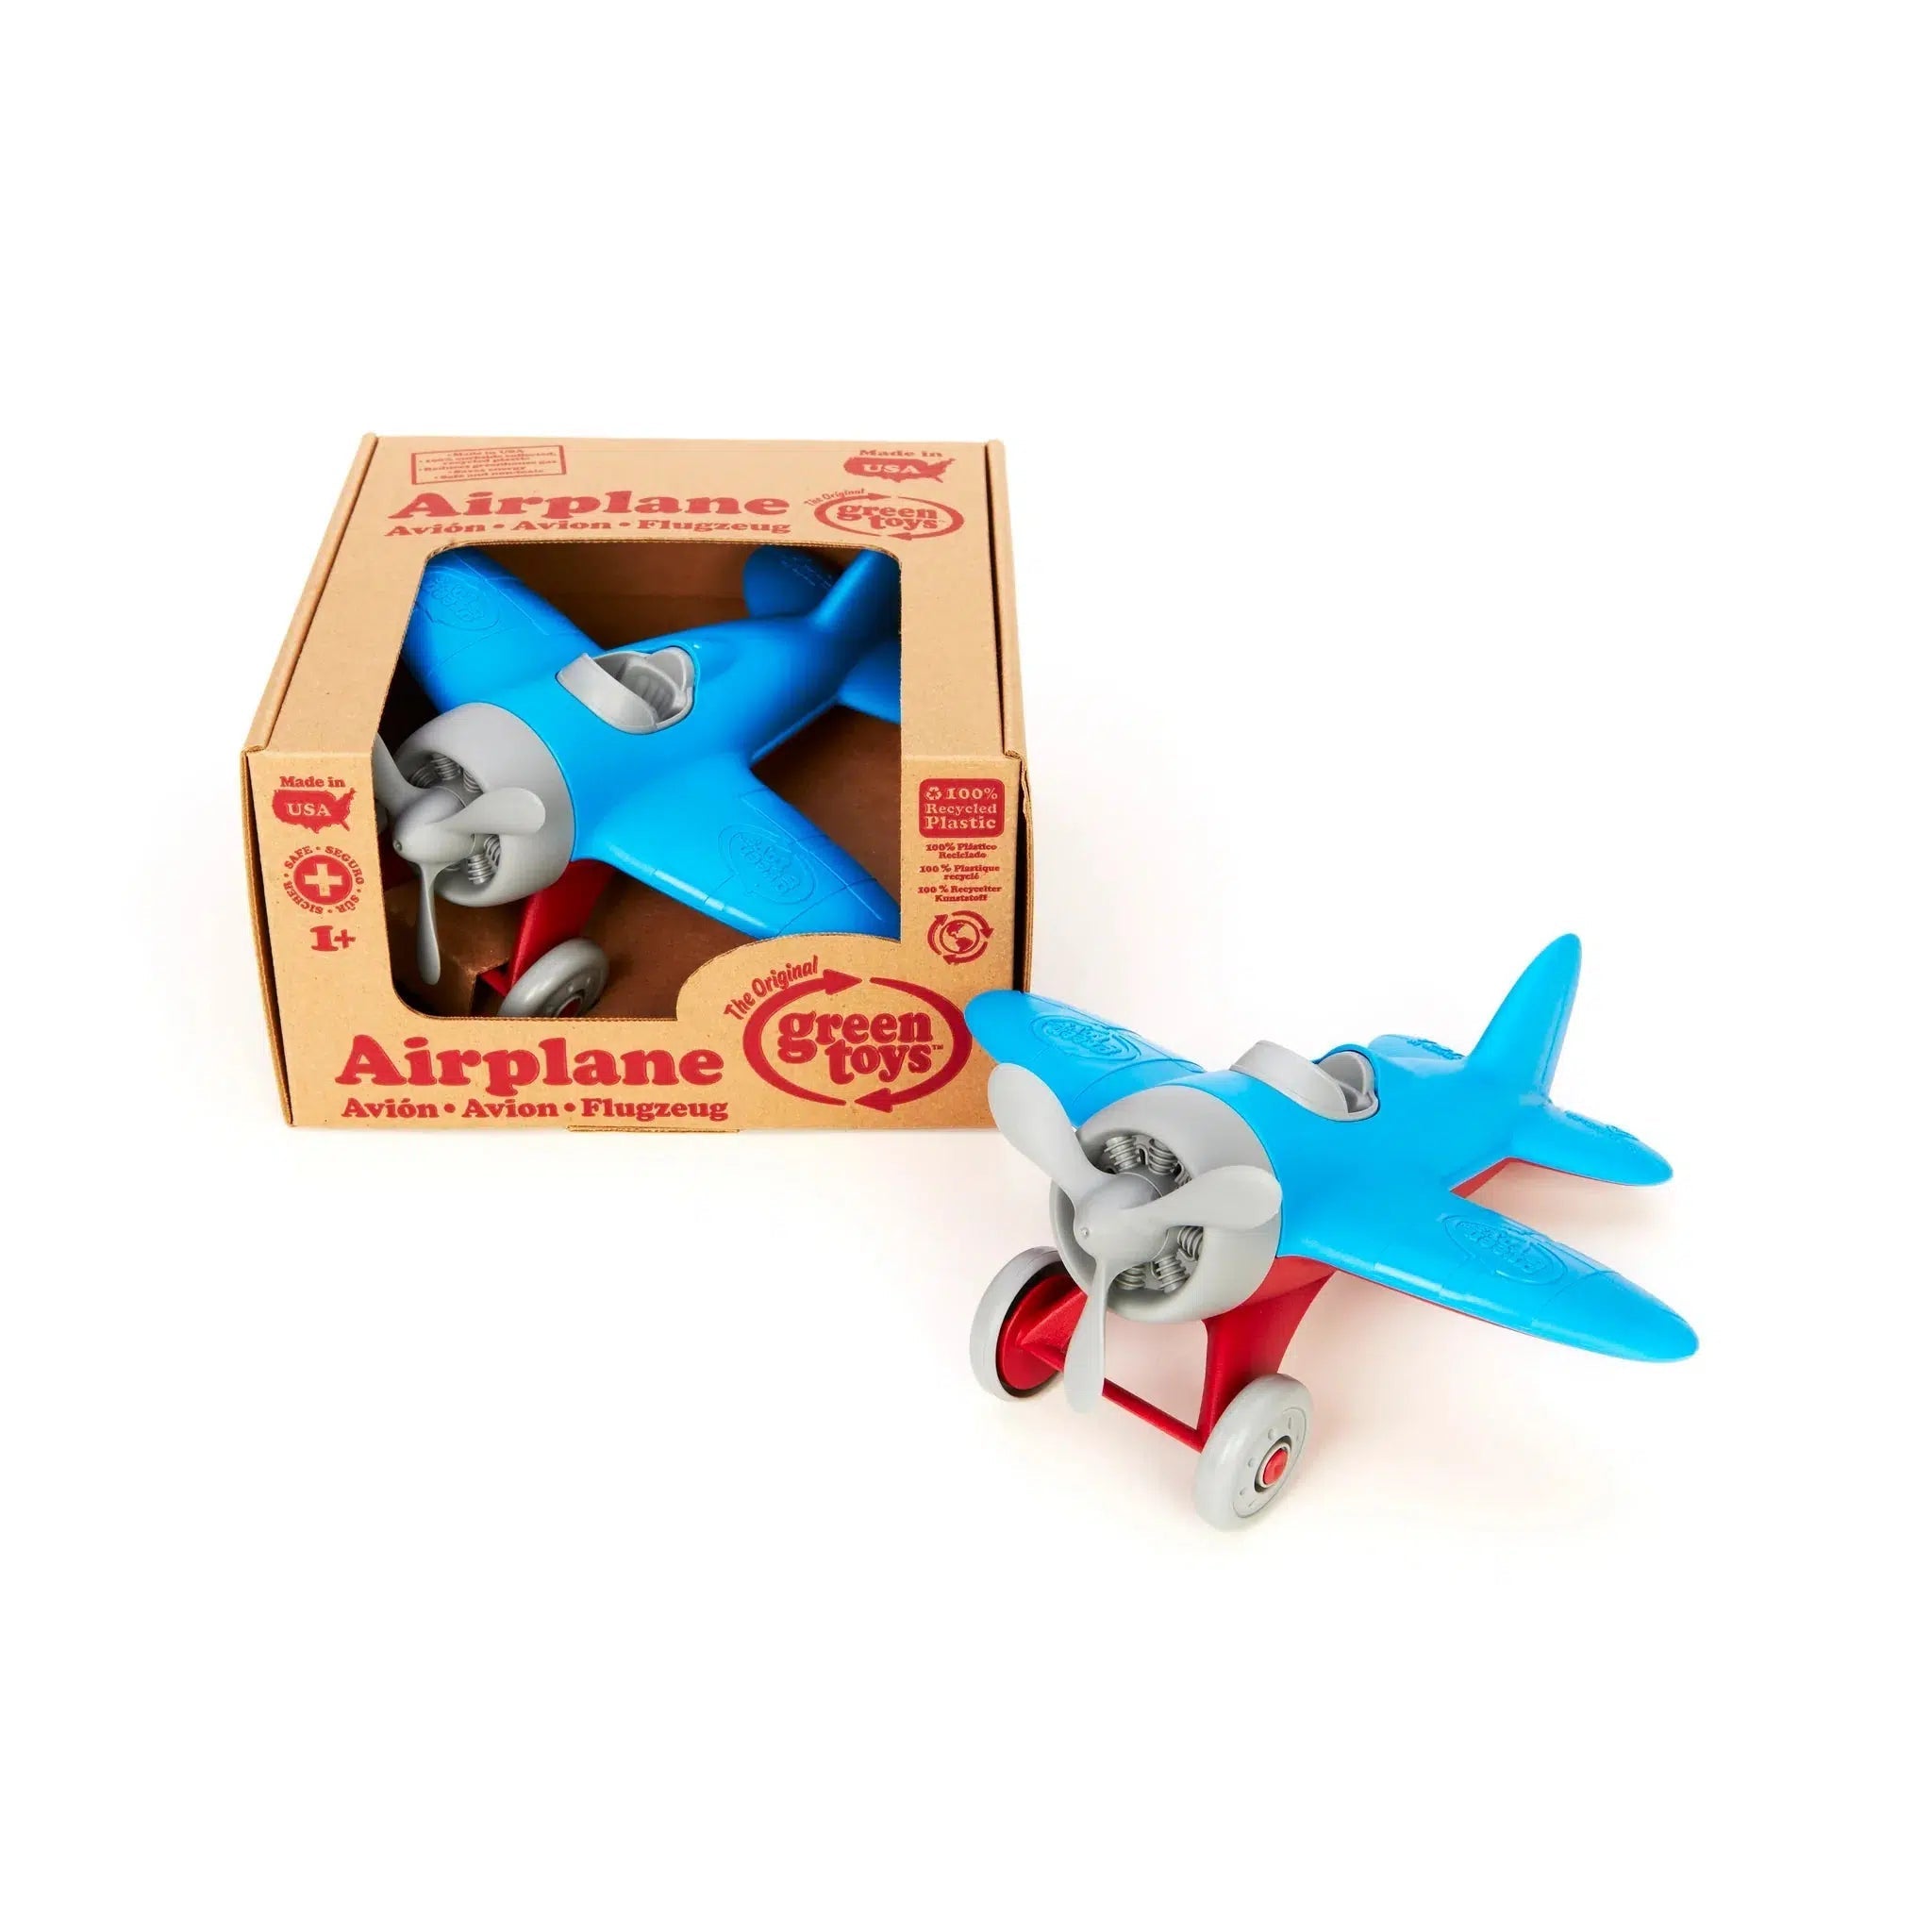 Melissa & Doug Wooden Airplane Play Set with 4 Play Figures and 4 Suitcases, Multicolor